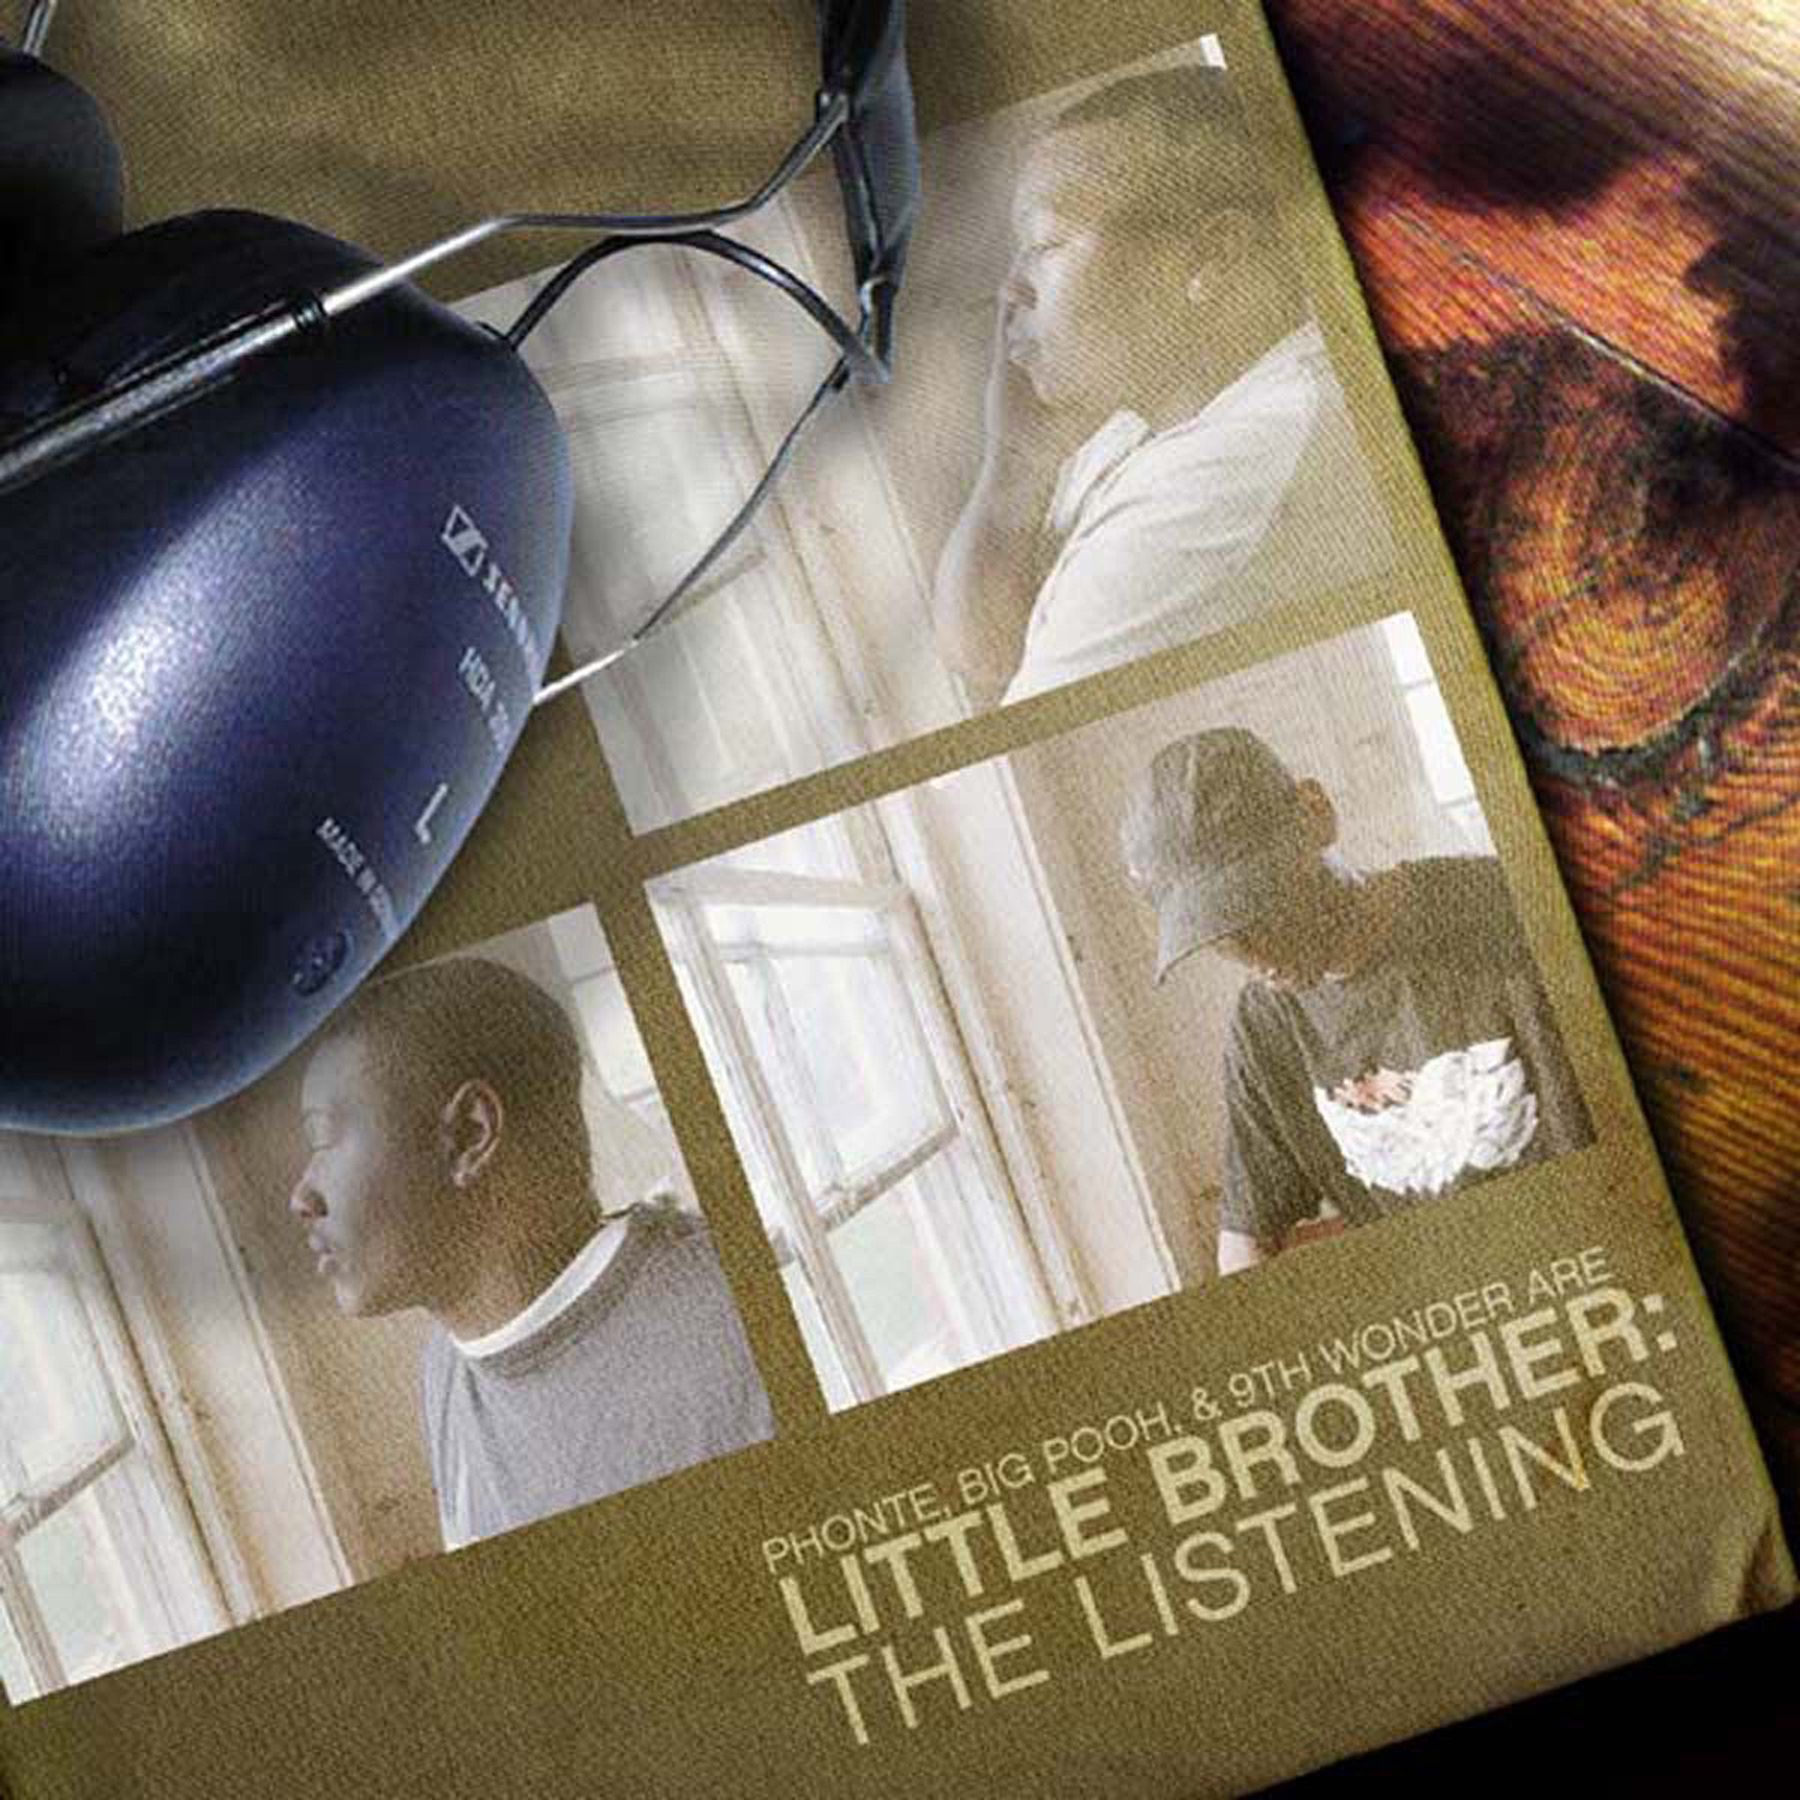 The Listening Cover